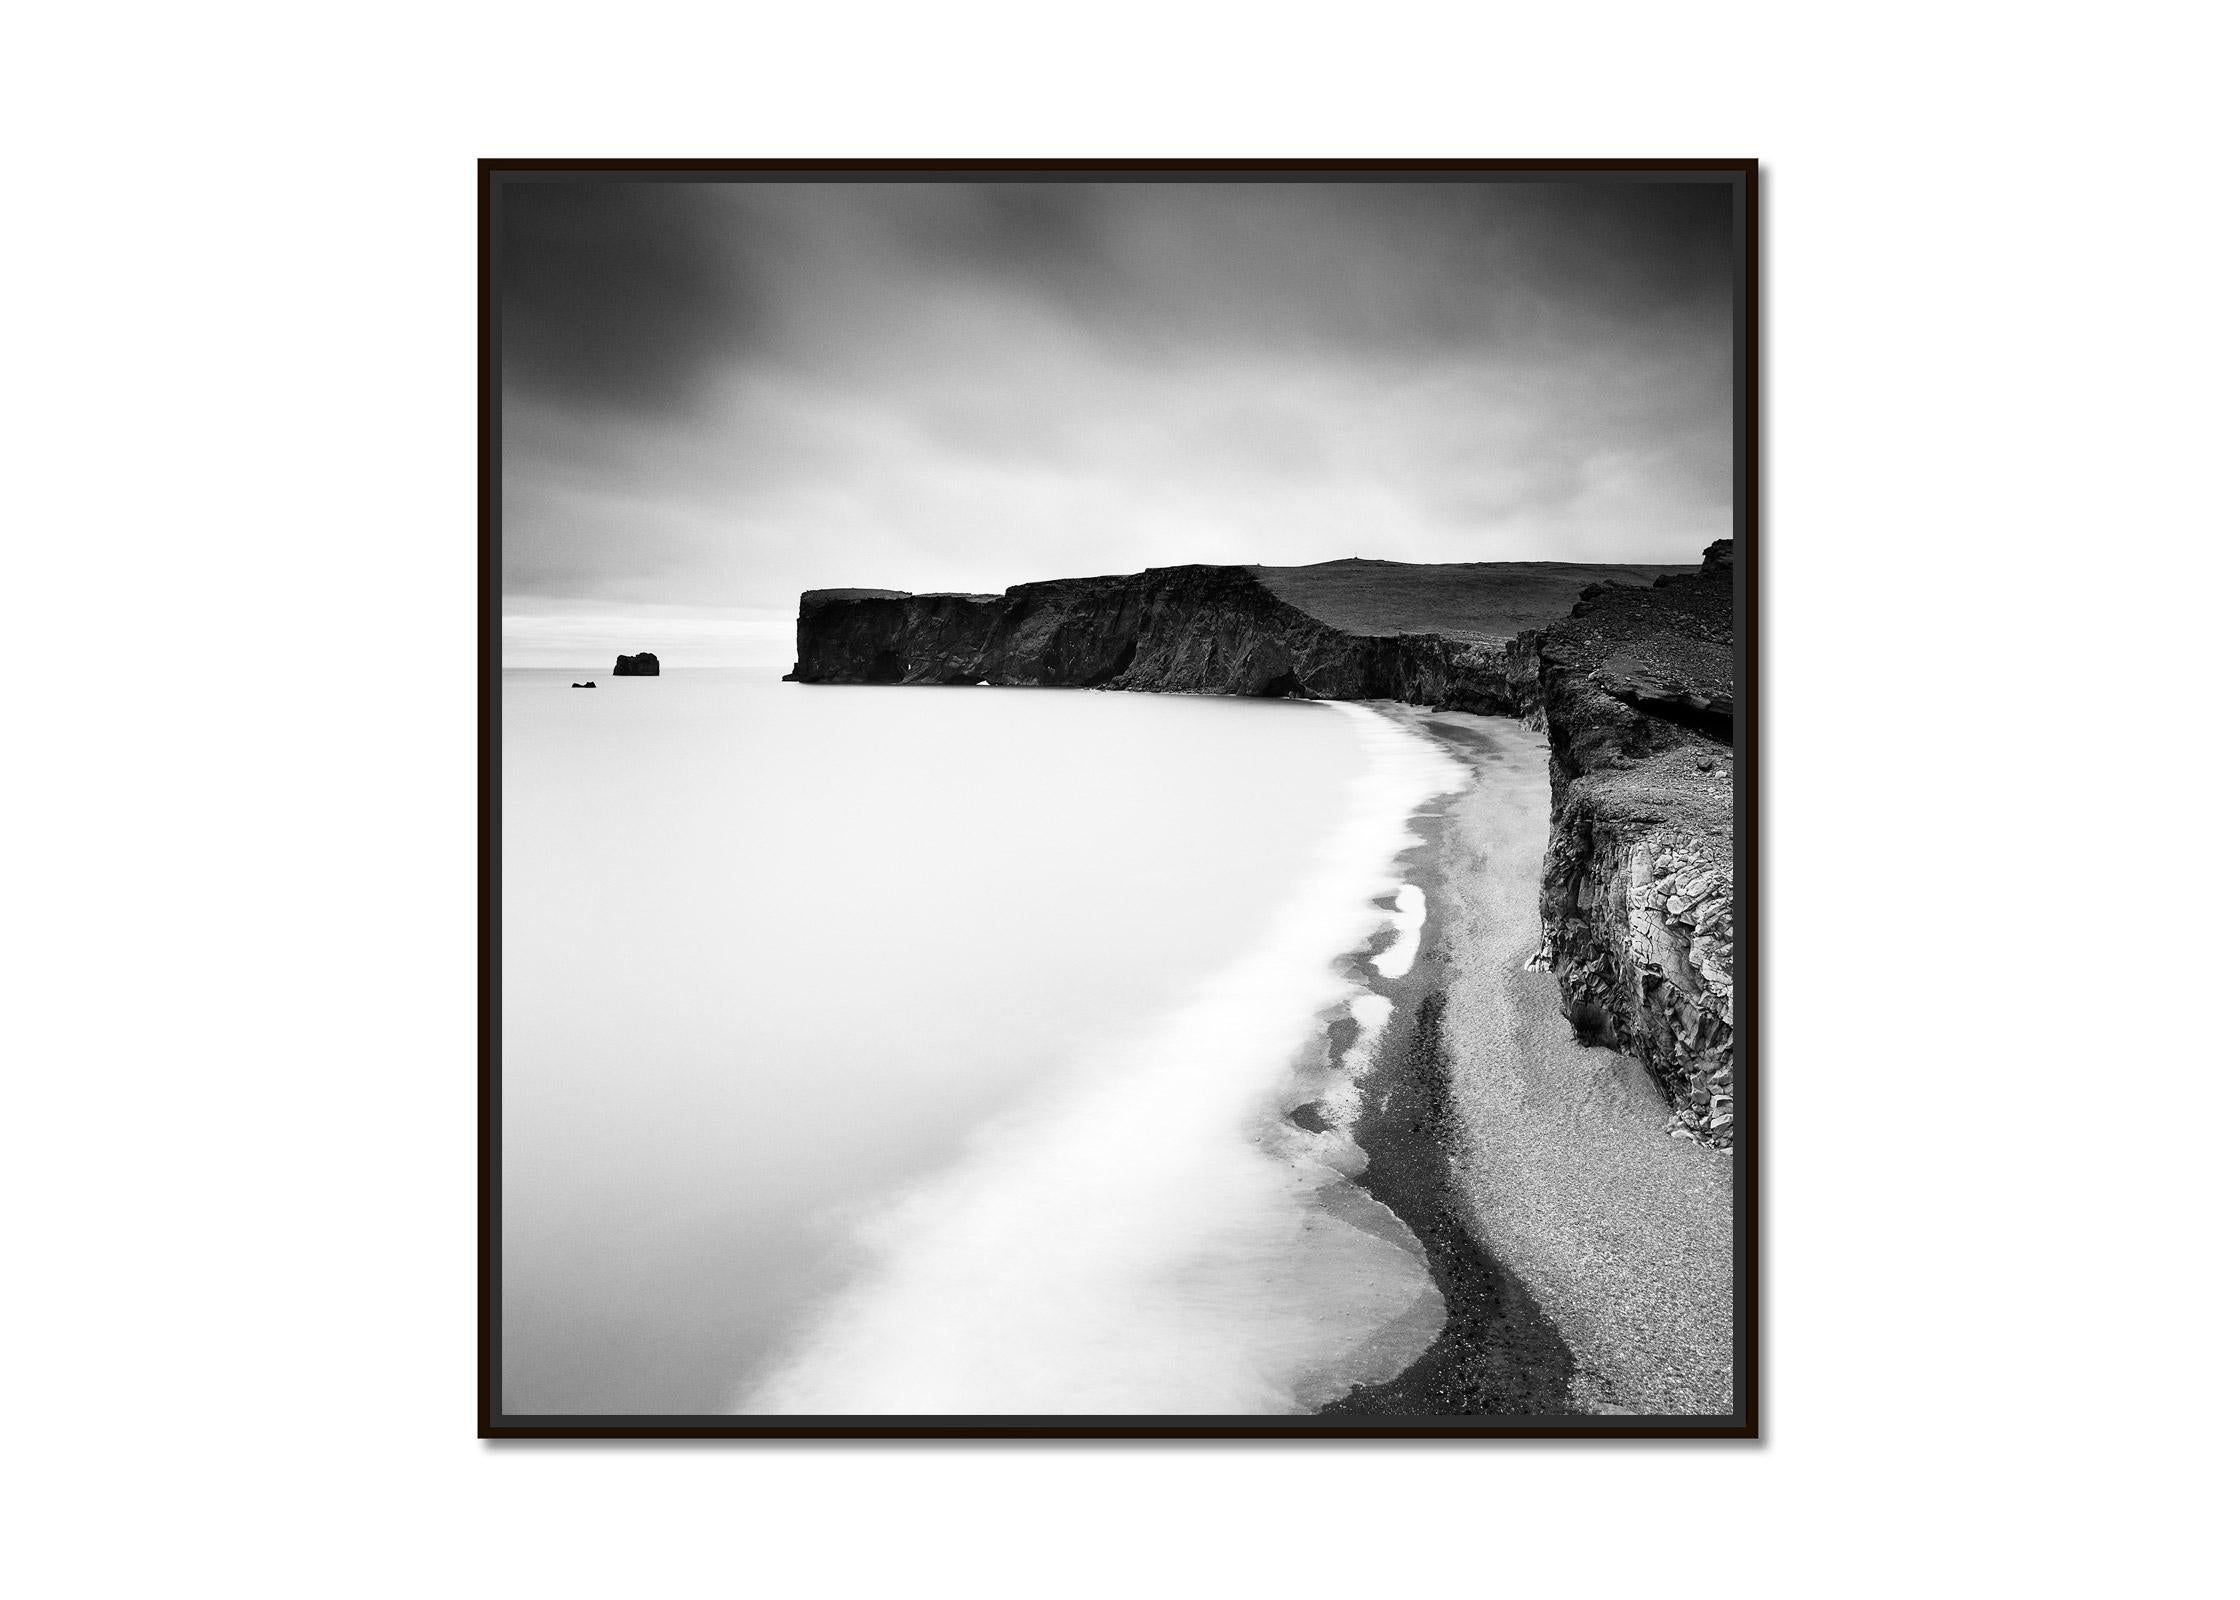 Detached Island, coast, Iceland, black and white fineart landscape photography - Photograph by Gerald Berghammer